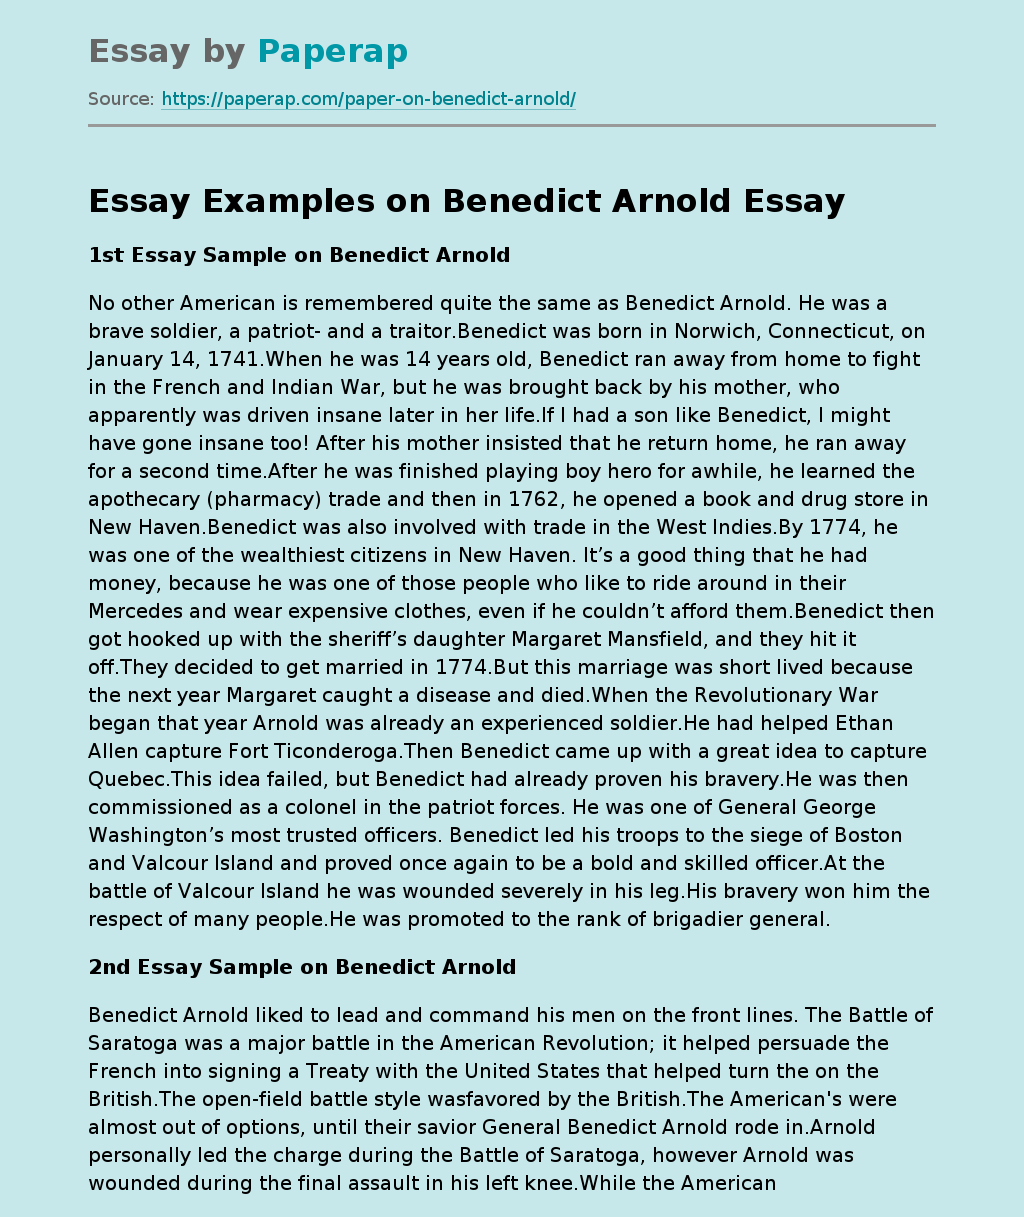 Essay Examples on Benedict Arnold